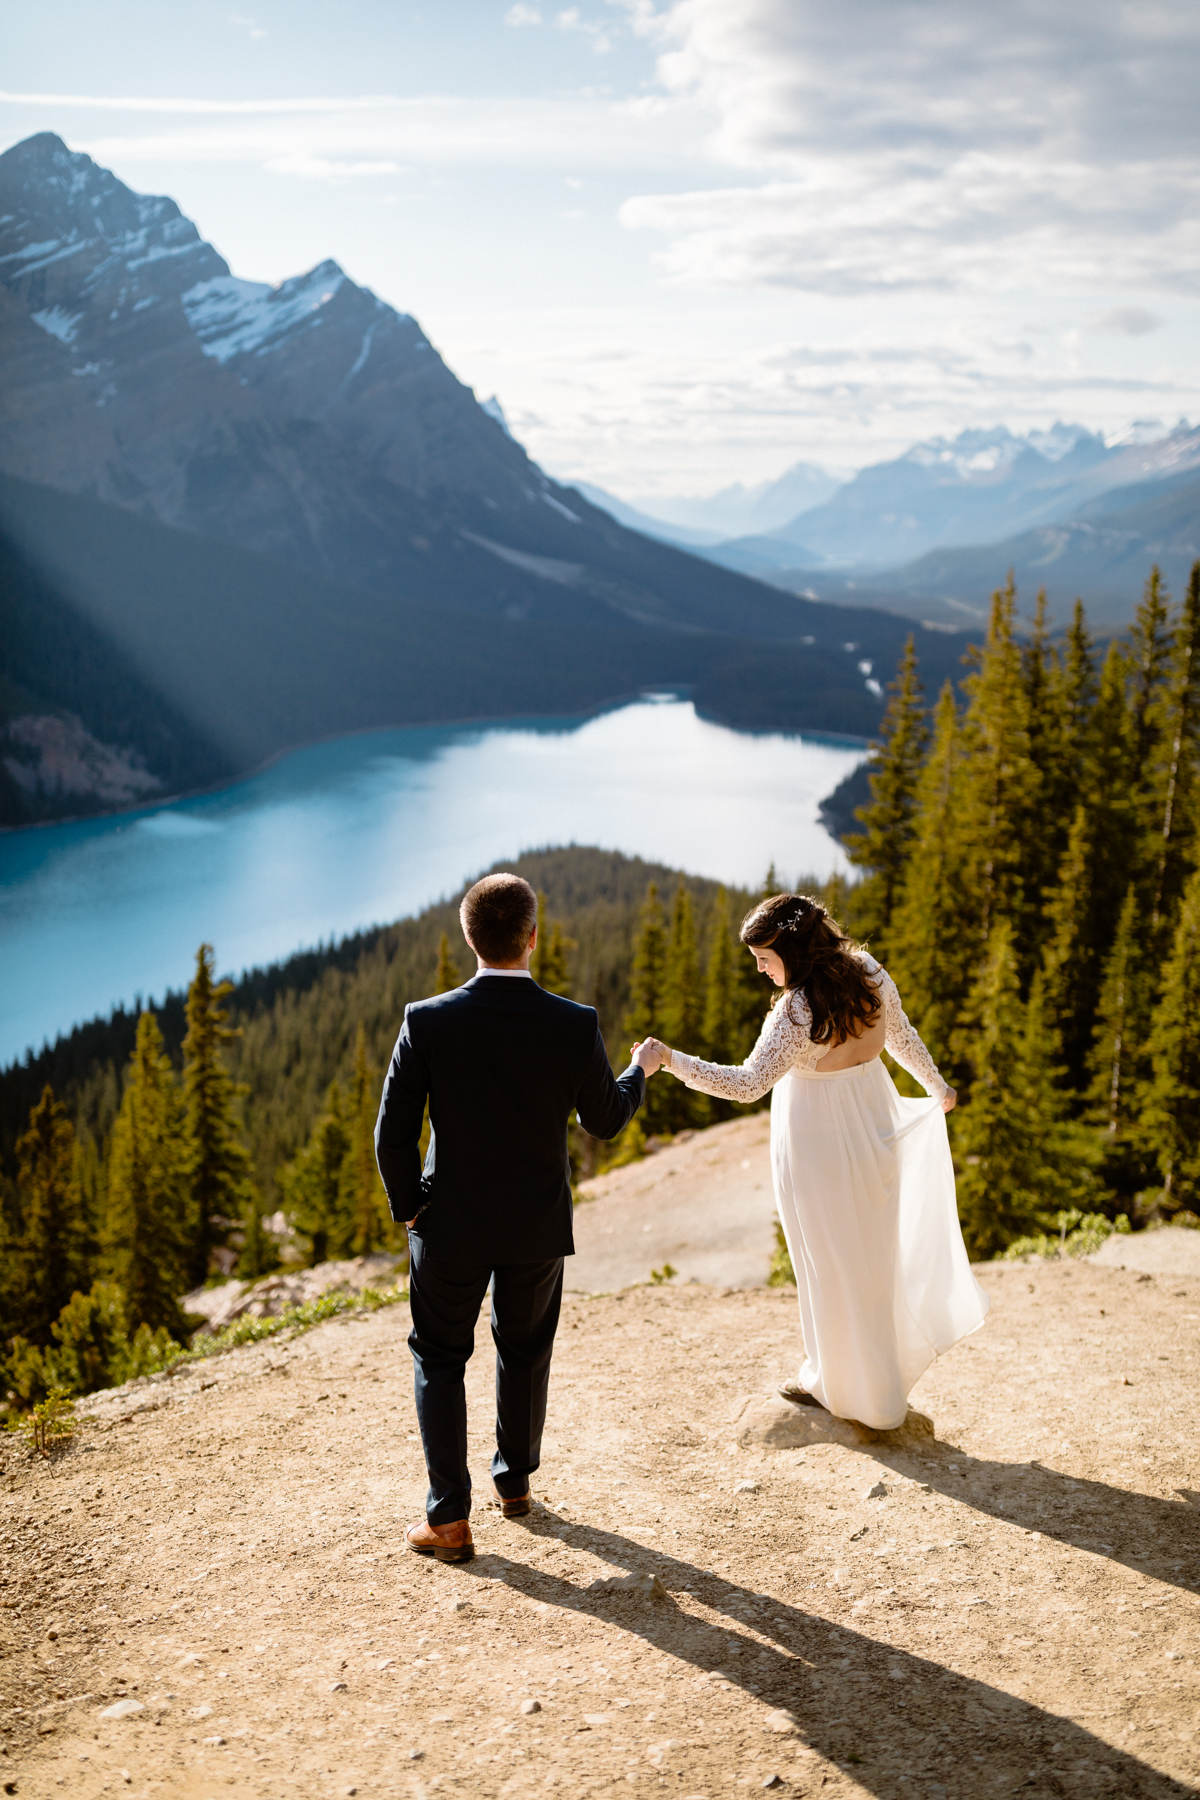 Vow Renewal Photography in Banff - Image 23